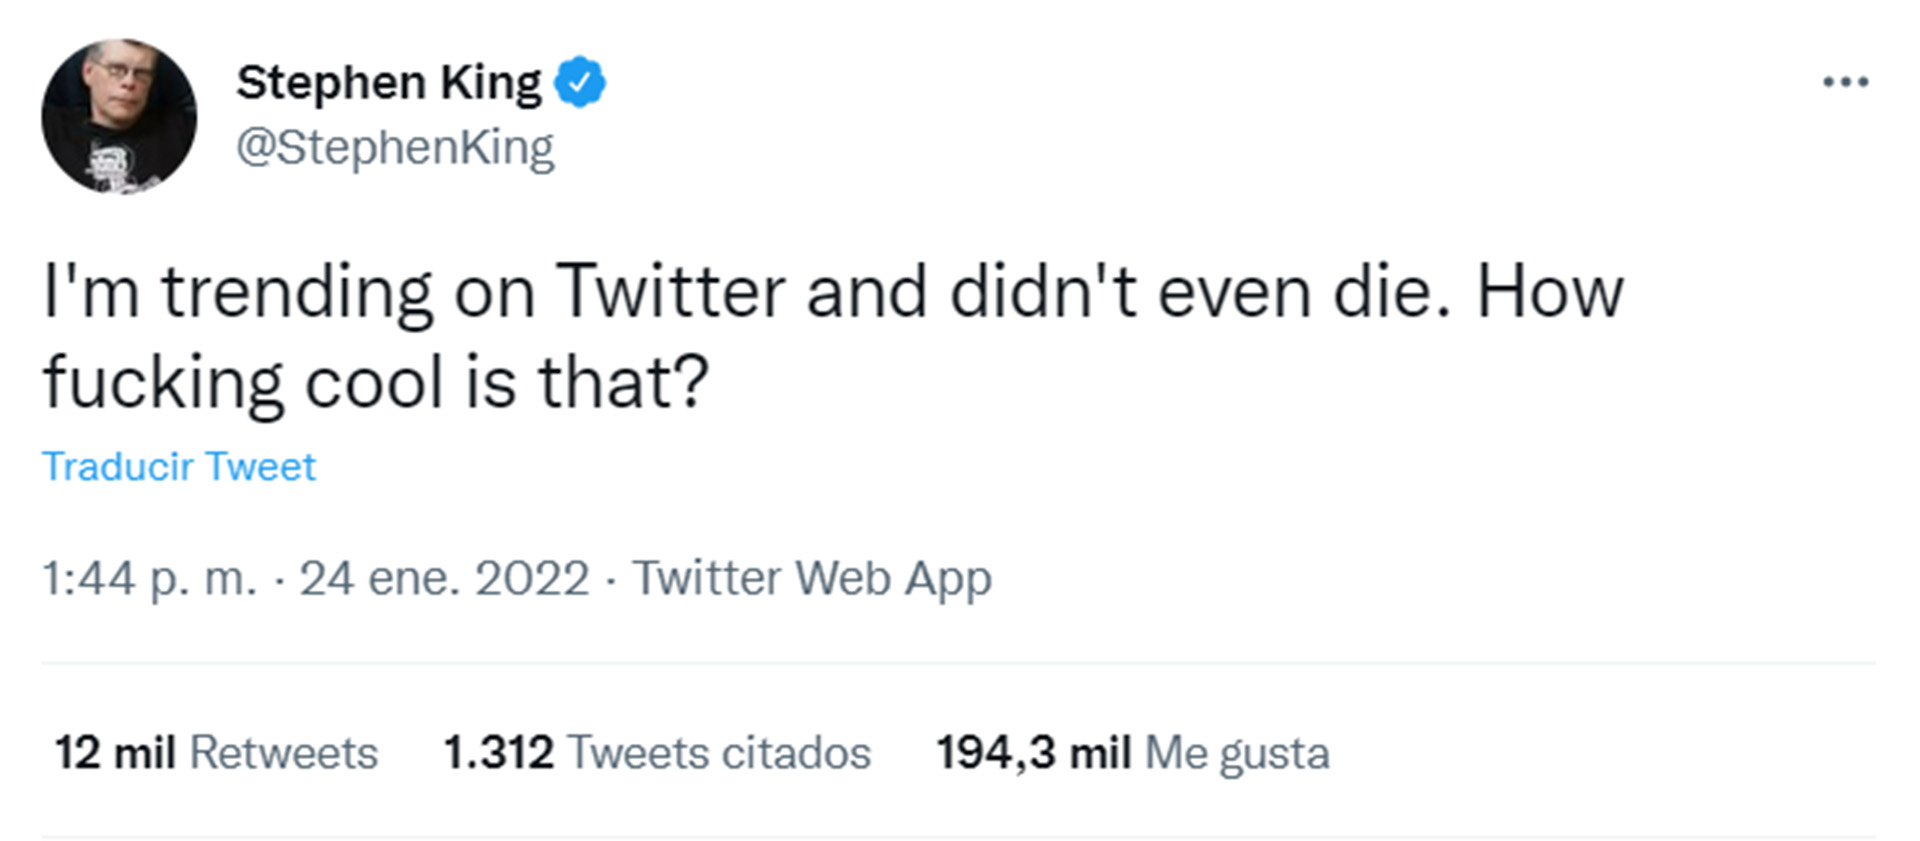 In addition to dealing with current issues such as abortion or inflation, Stephen King often uses Twitter to make jokes and show that he is as adept at humor as he is at terror.